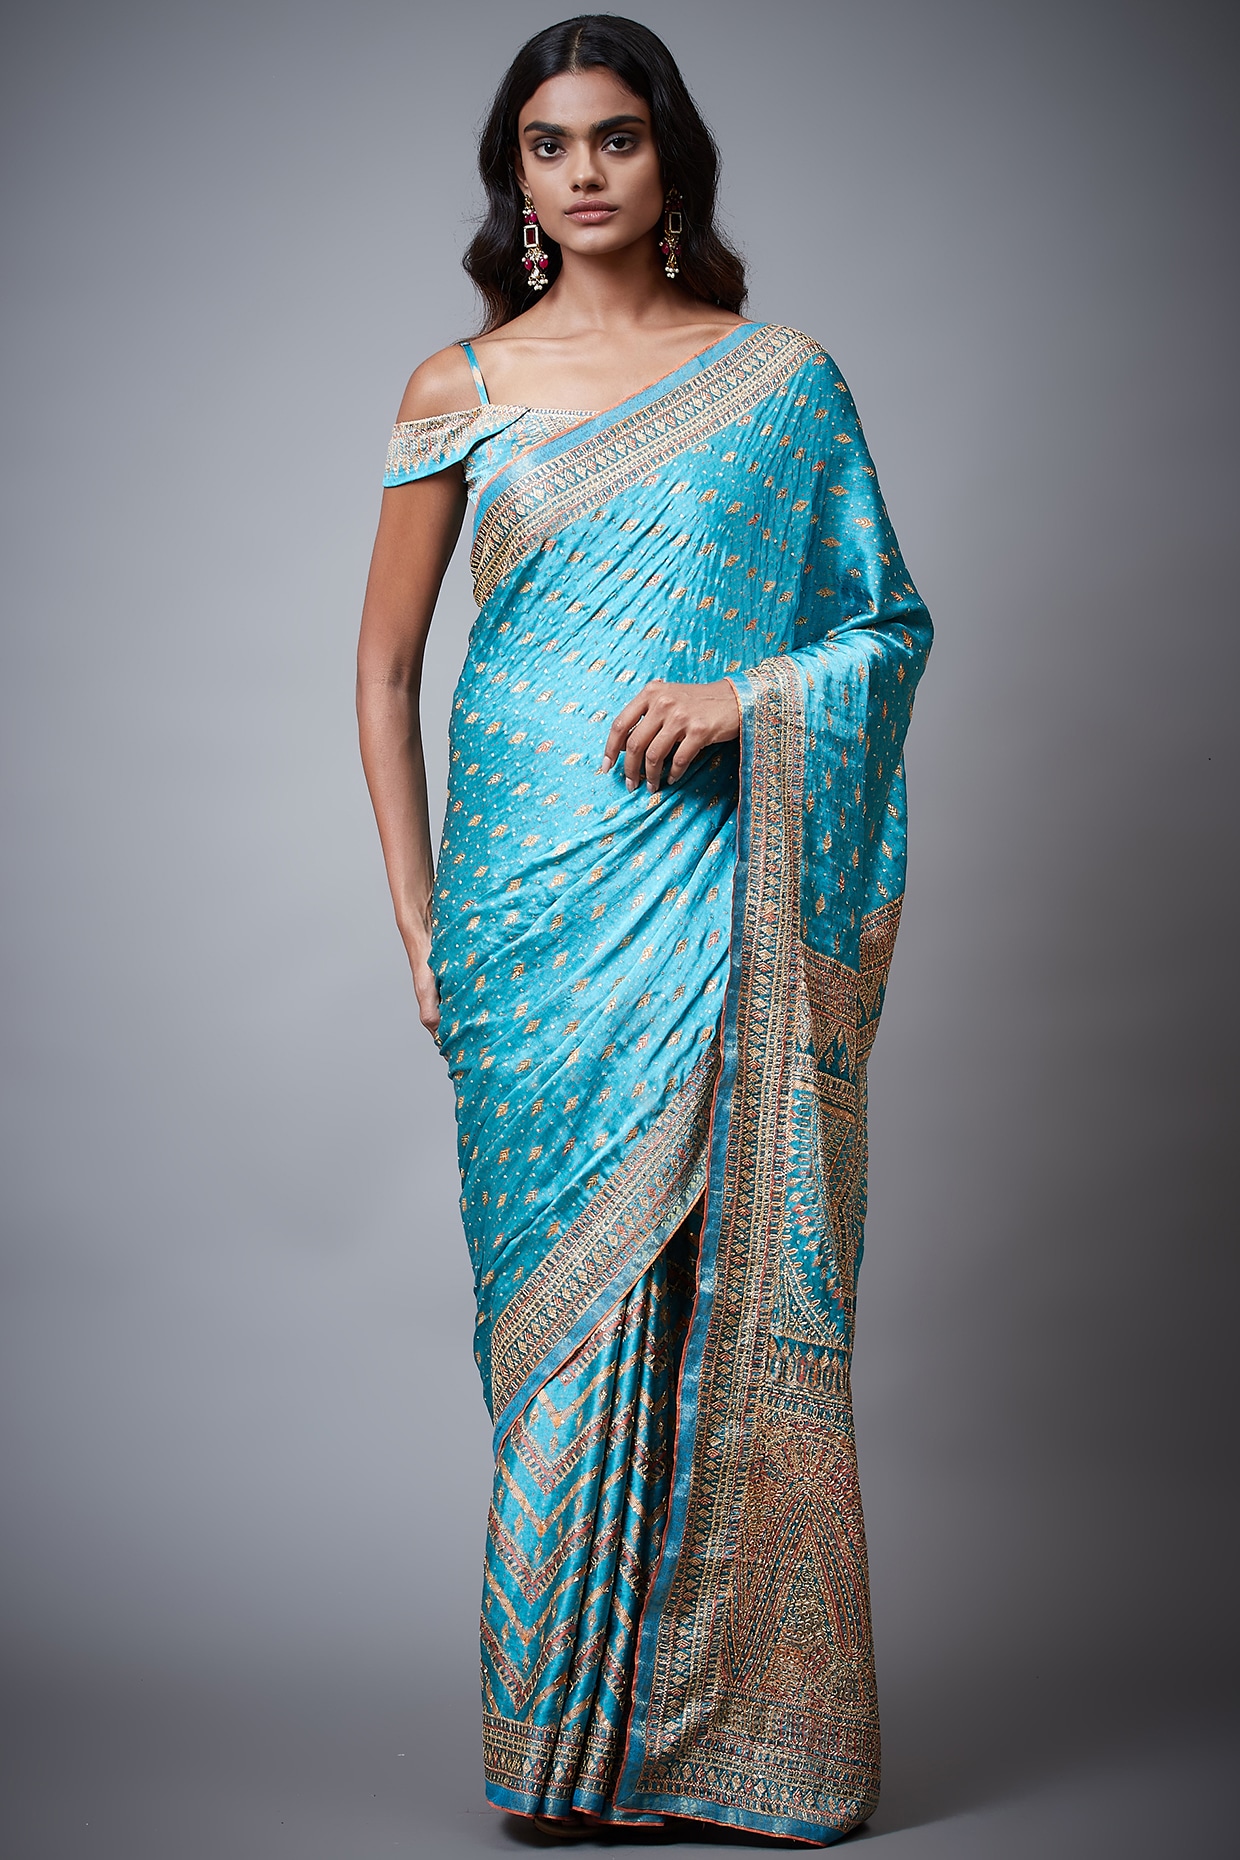 Peacock Green Satin Art Silk Saree with Blouse Online Shopping: SMA4482 |  Indian dresses, Party wear sarees, Indian outfits